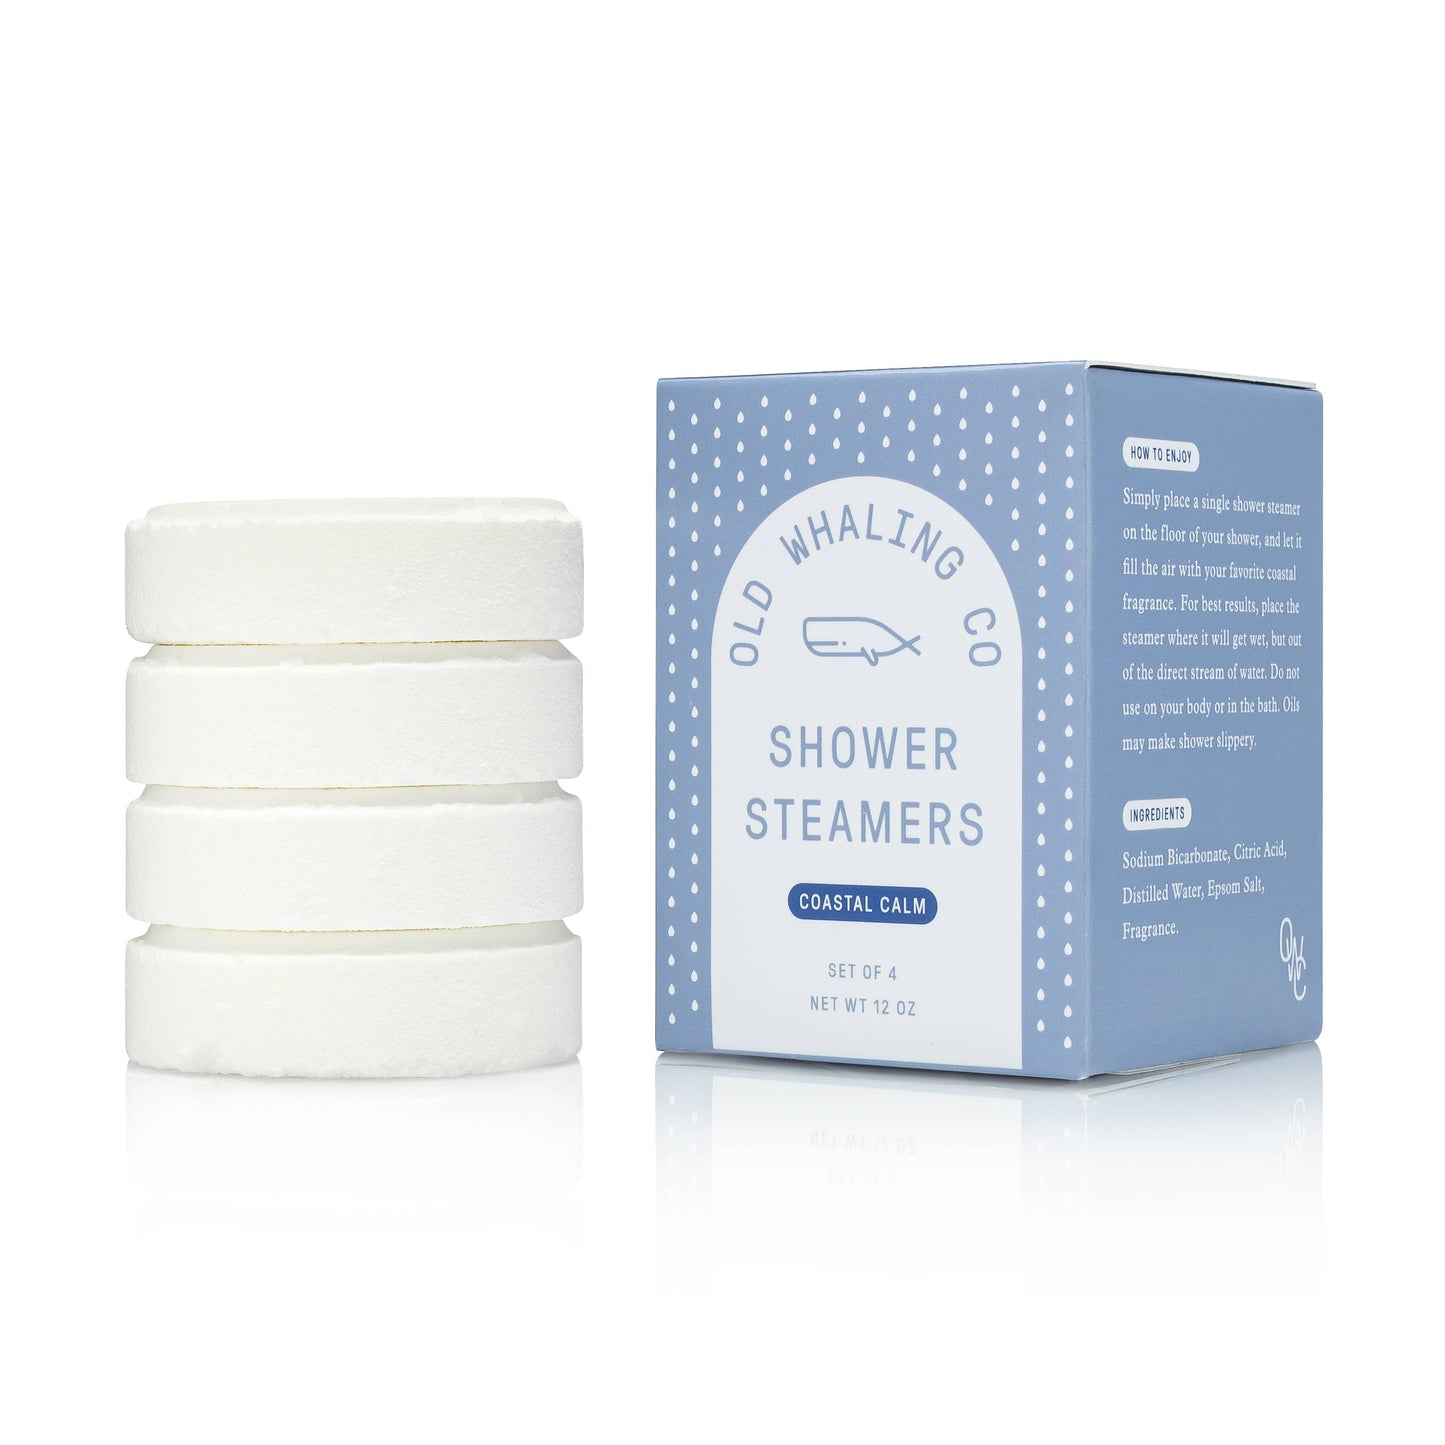 Delicious shower steamer to help you relax. 